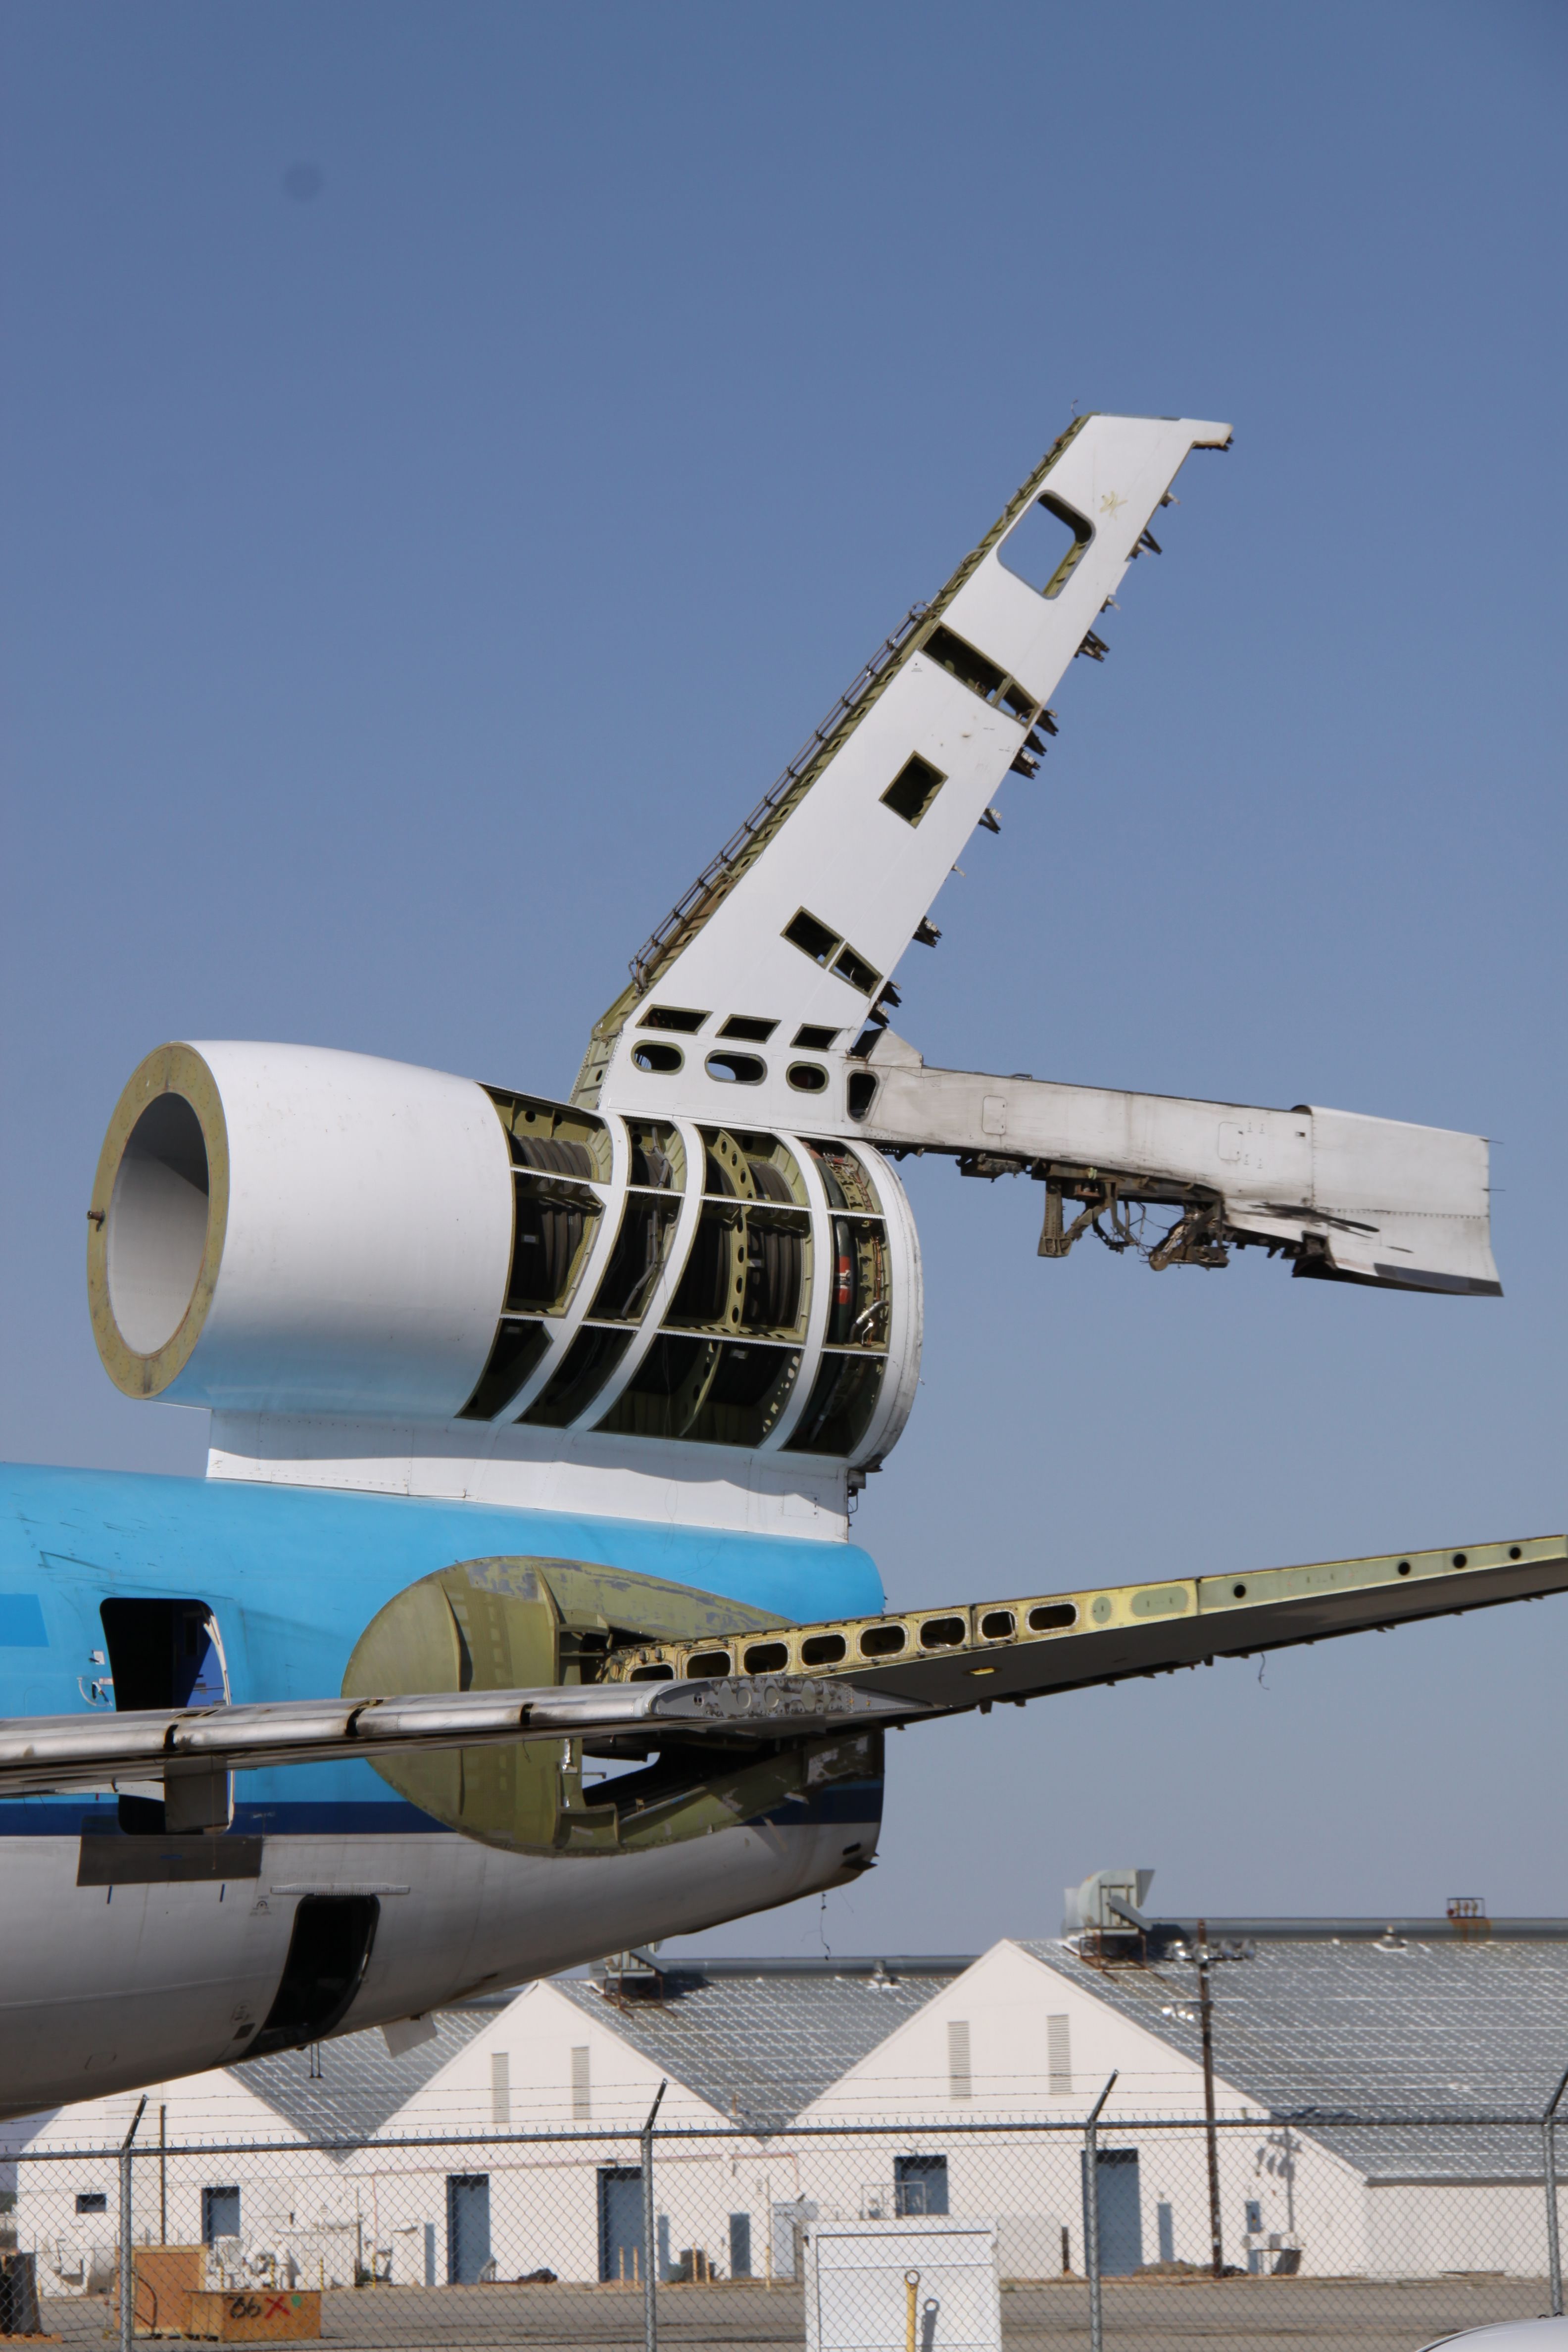 3168px-Unmarked_McDonnell_Douglas_MD-11_Ex_--_KLM_Royal_Dutch_Airlines_Tail_%28_PH-KCH_%29_%289075809652%29.jpg